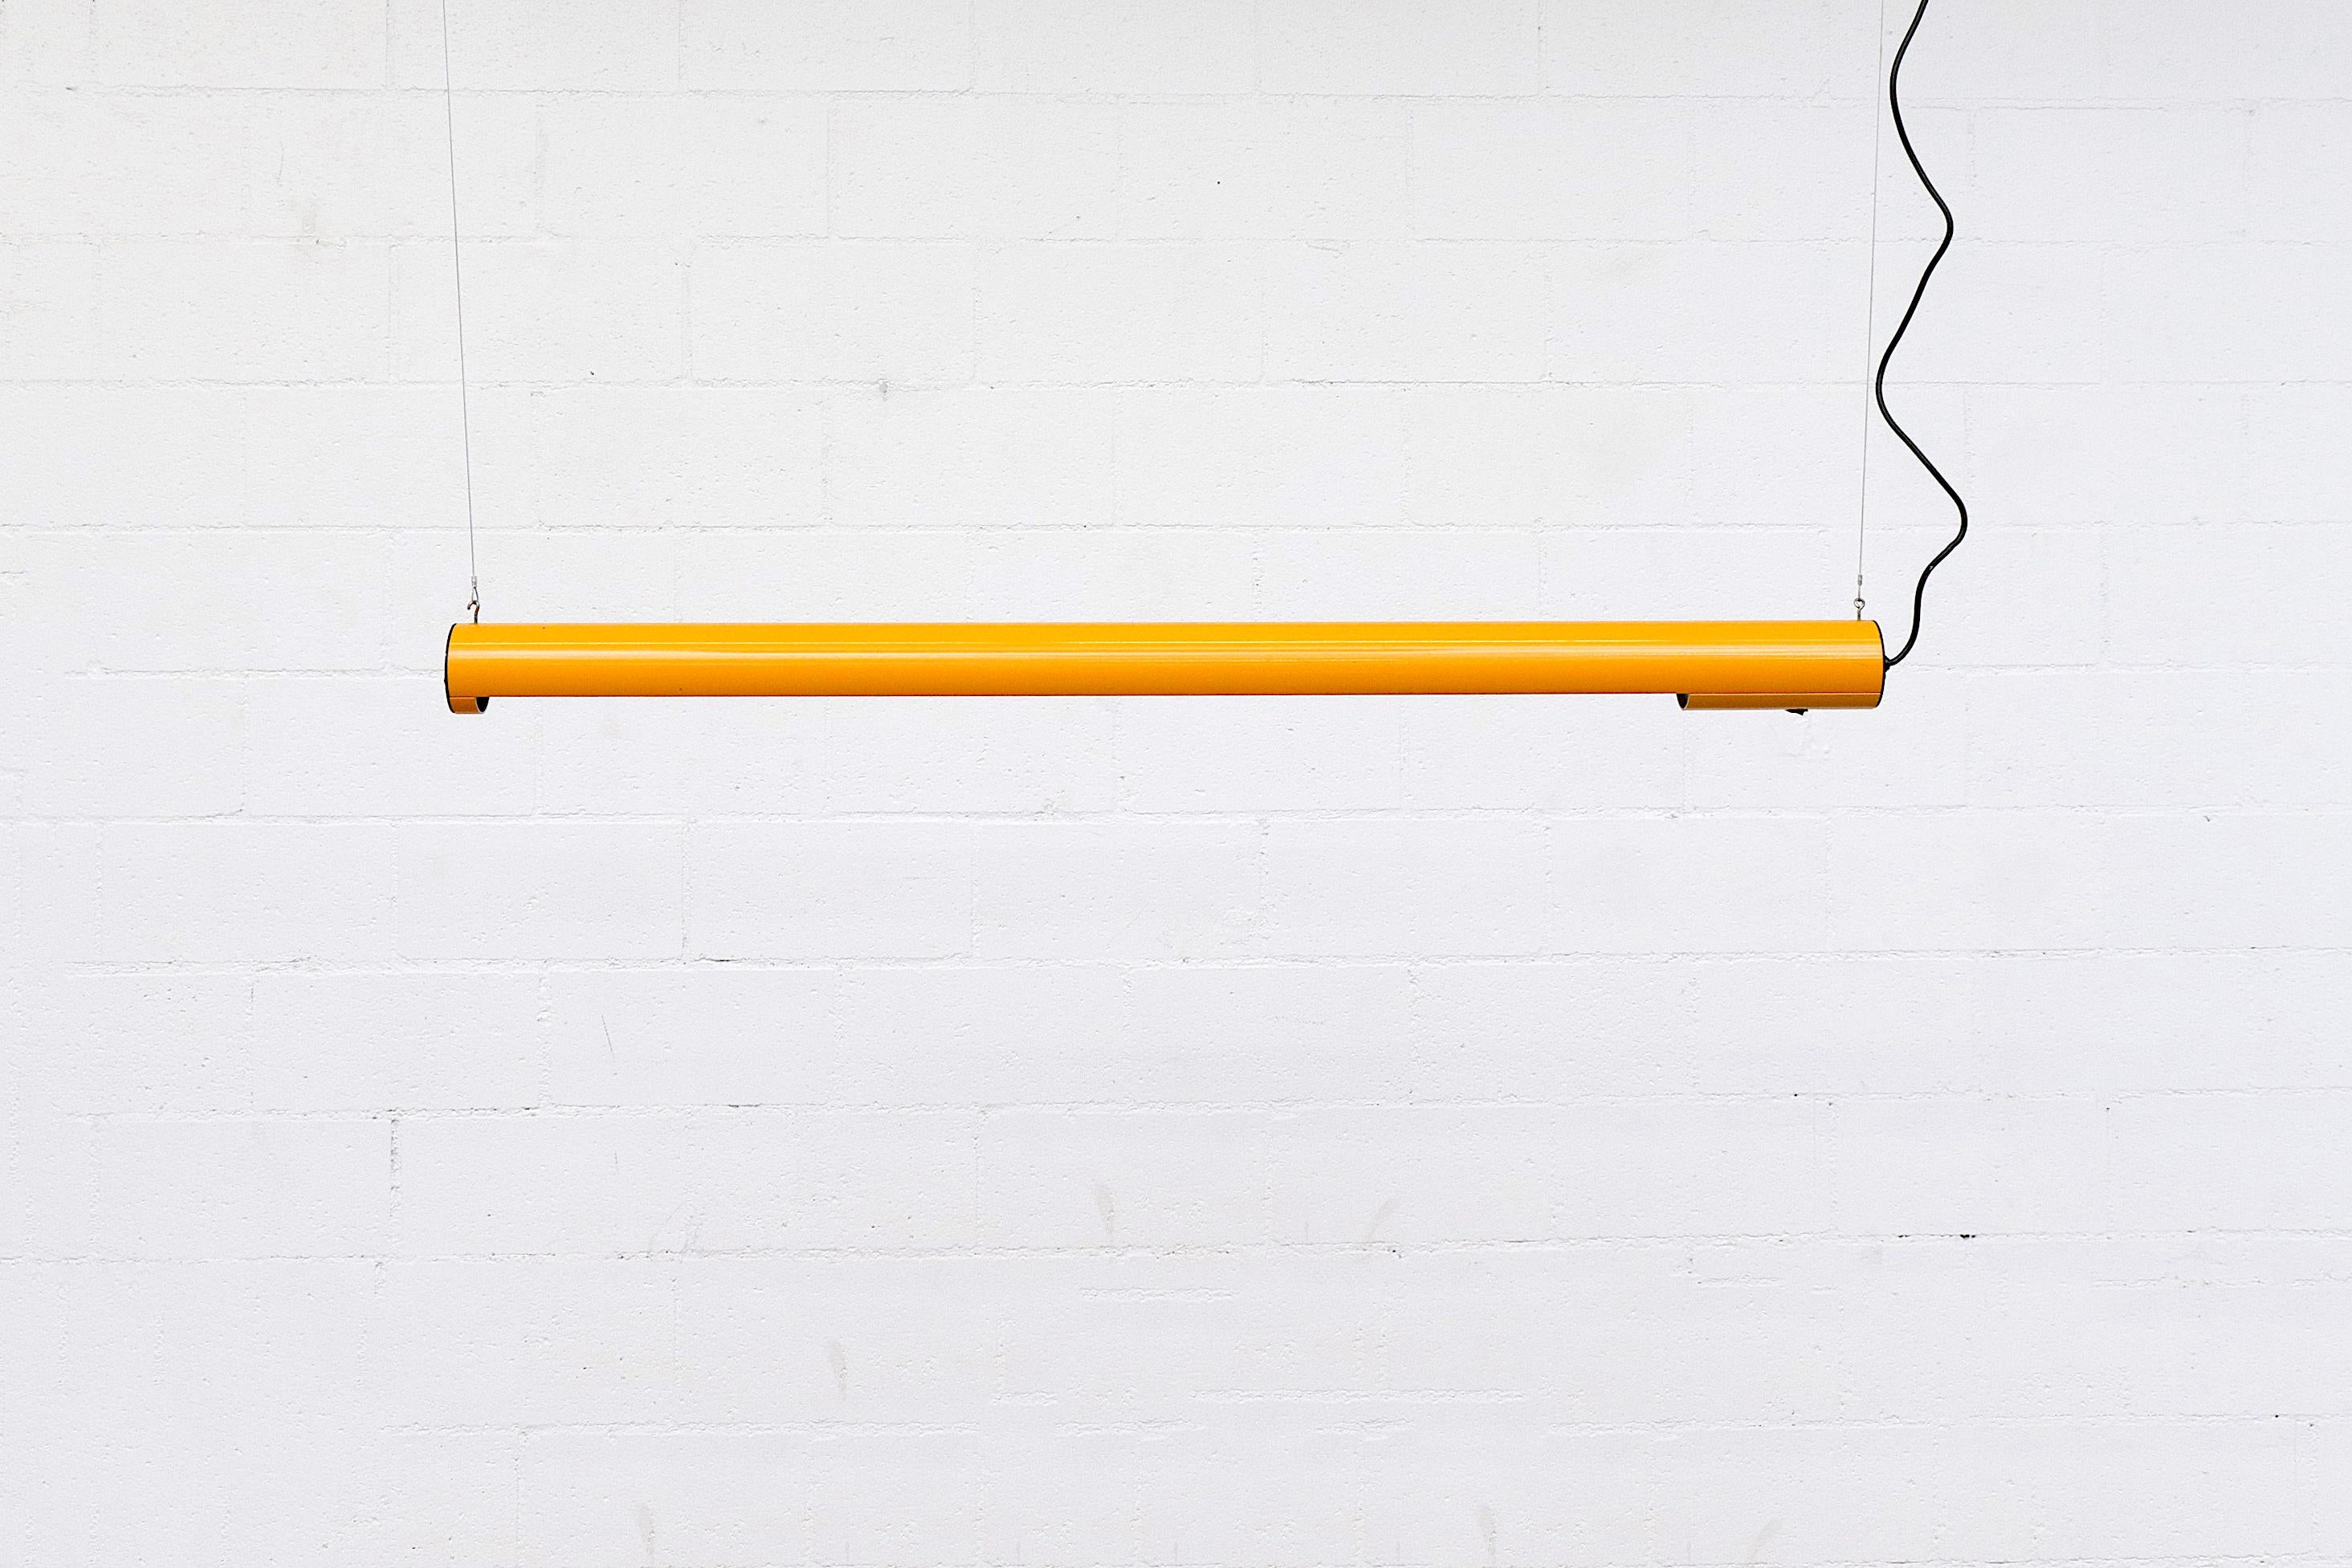 Enameled Tangerine tubular florescent light, suspended by 2 cables or chain. Actual tube measures 56.625